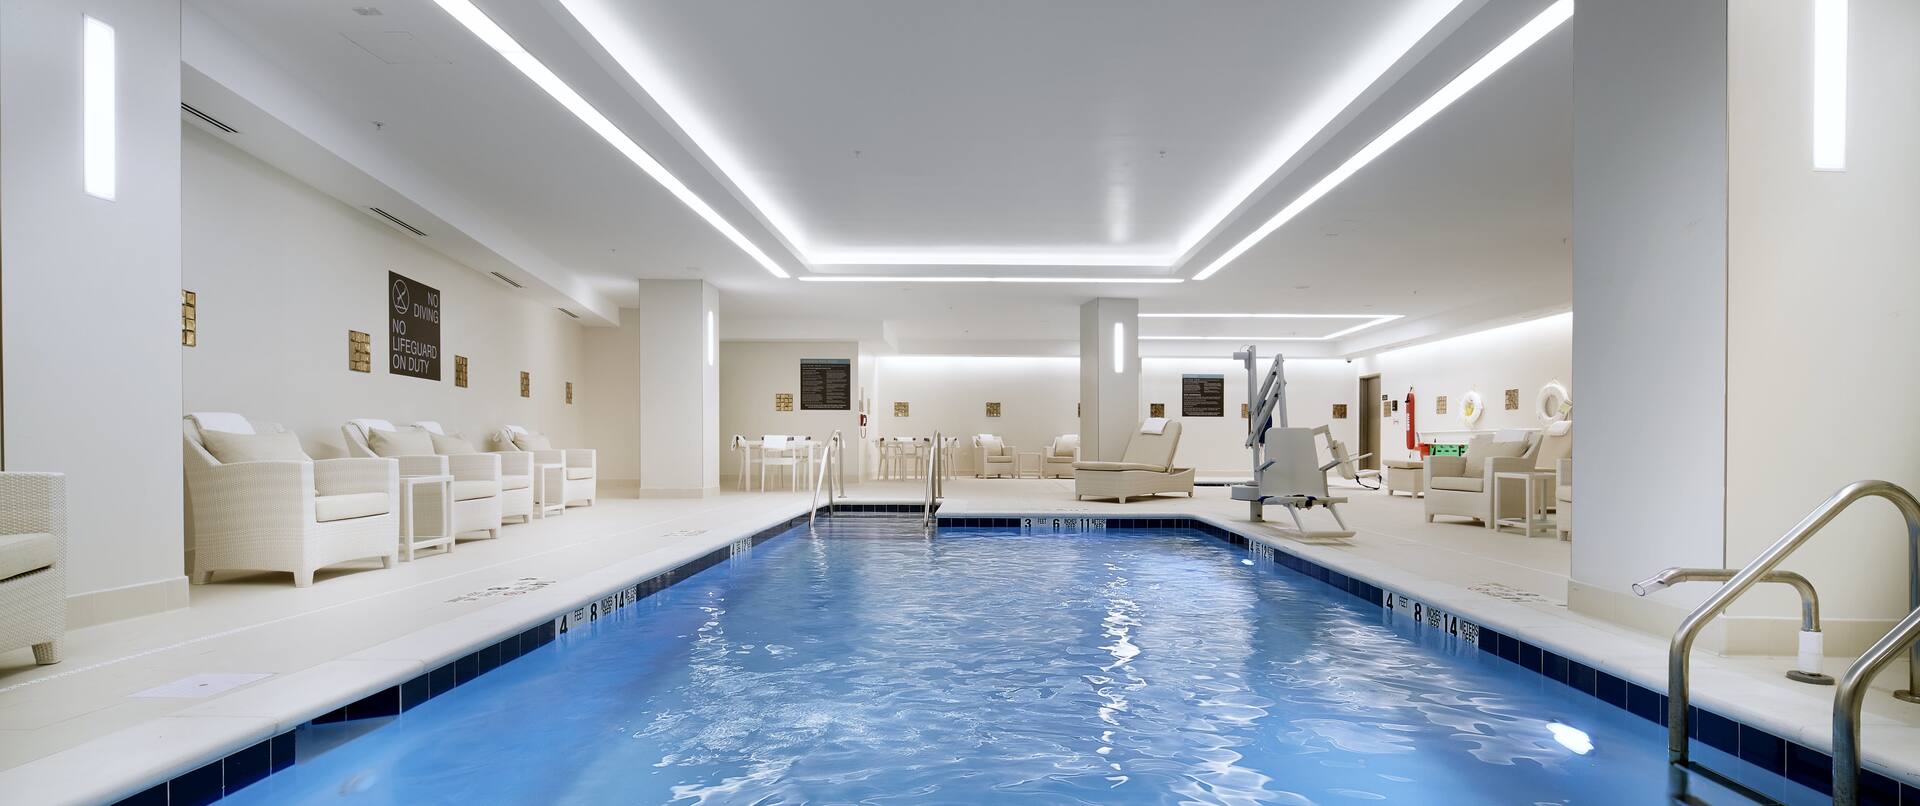 Indoor Pool with Deck Seating